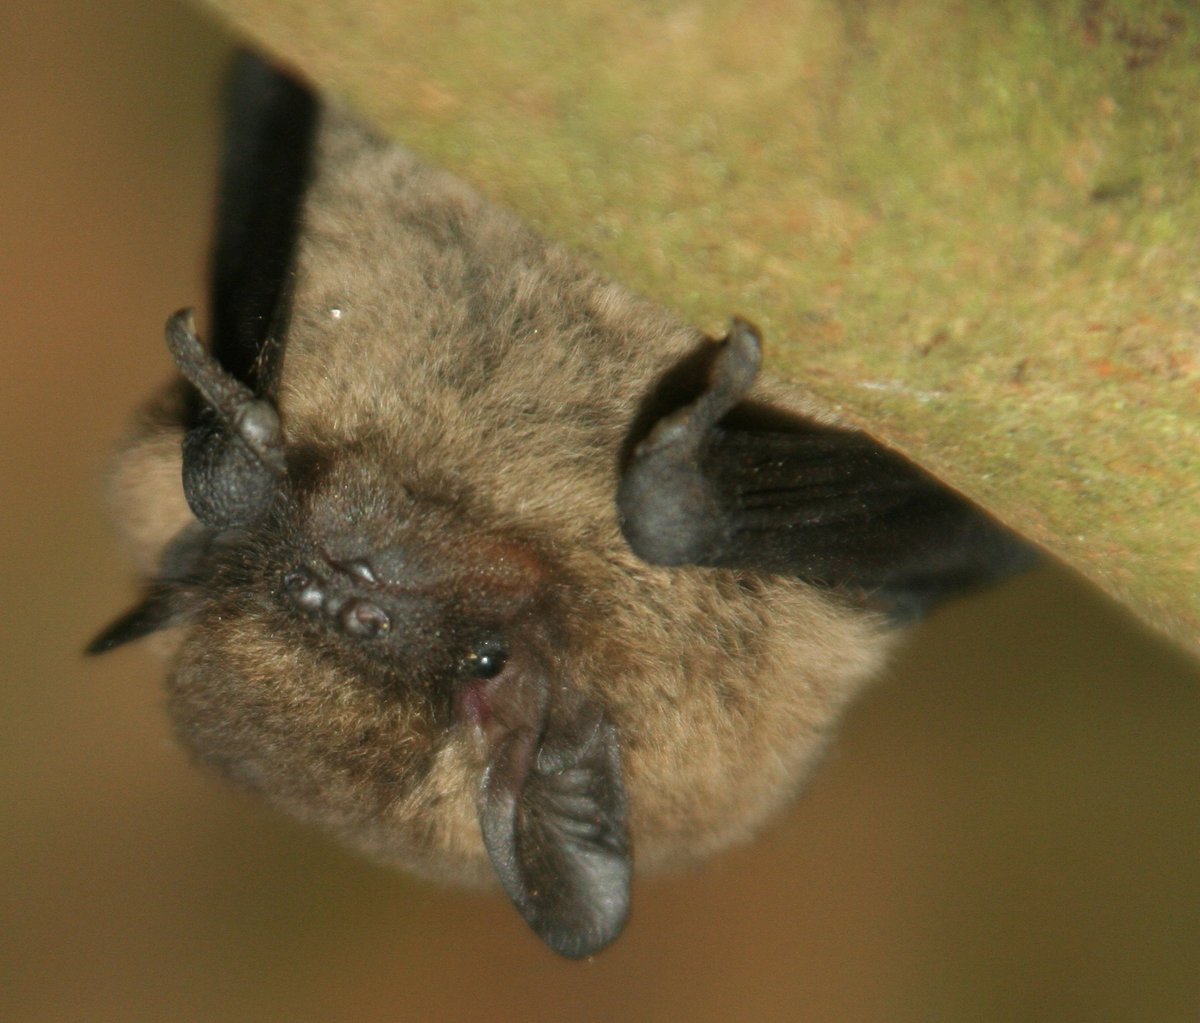 Did you know the common pipistrelle can eat up to 3,000 insects a night? That's quite an appetite! Our mill is home to the largest roost in West Yorkshire, and our survey group volunteers have been counting them over the last few weeks. Find out more; nationaltrust.org.uk/our-cause/natu…